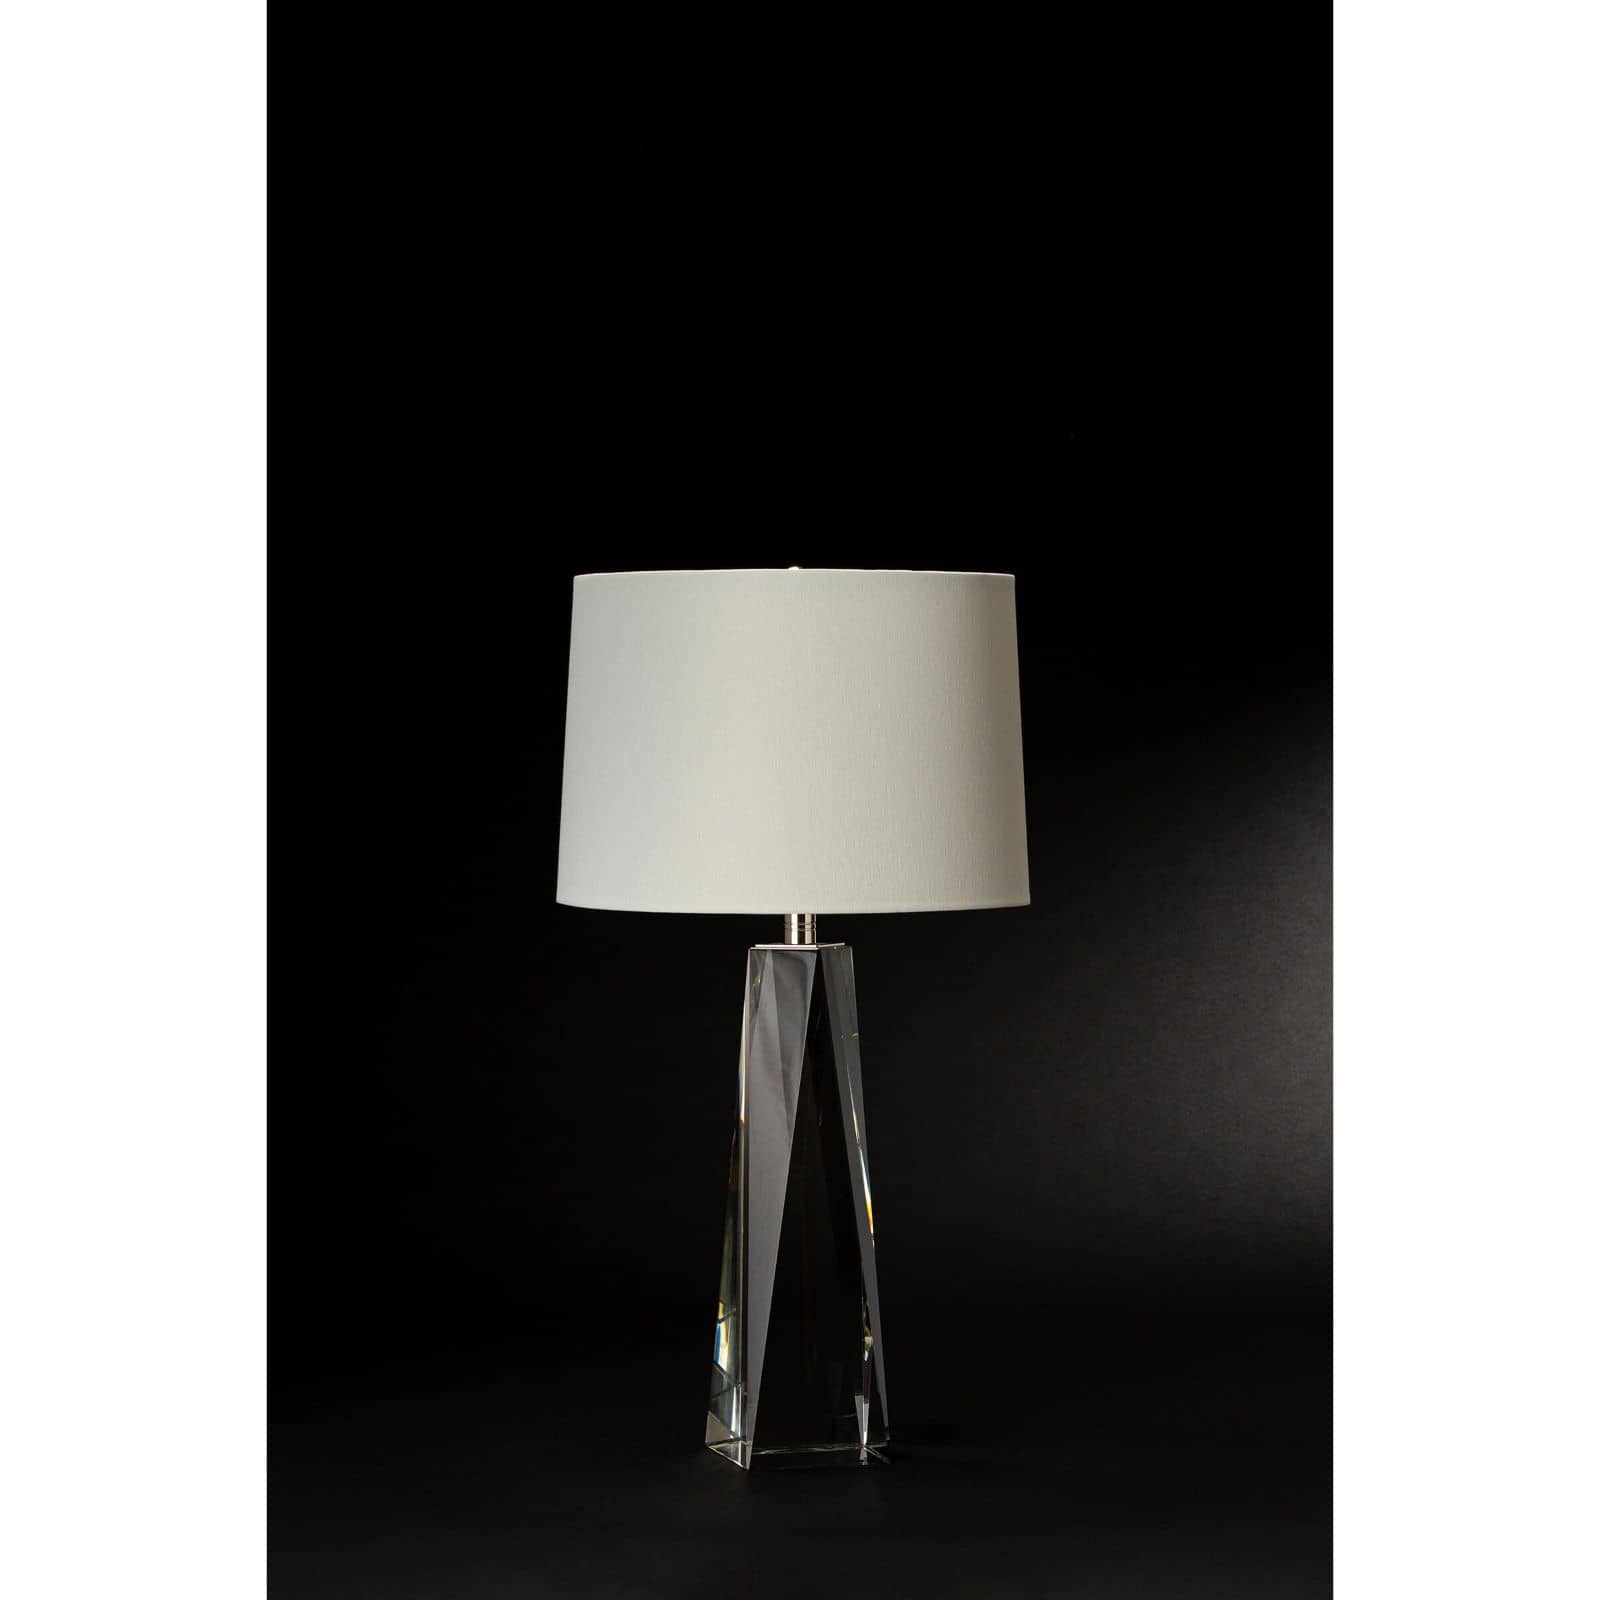 Regina Andrew Angelica Crystal Table Lamp Small